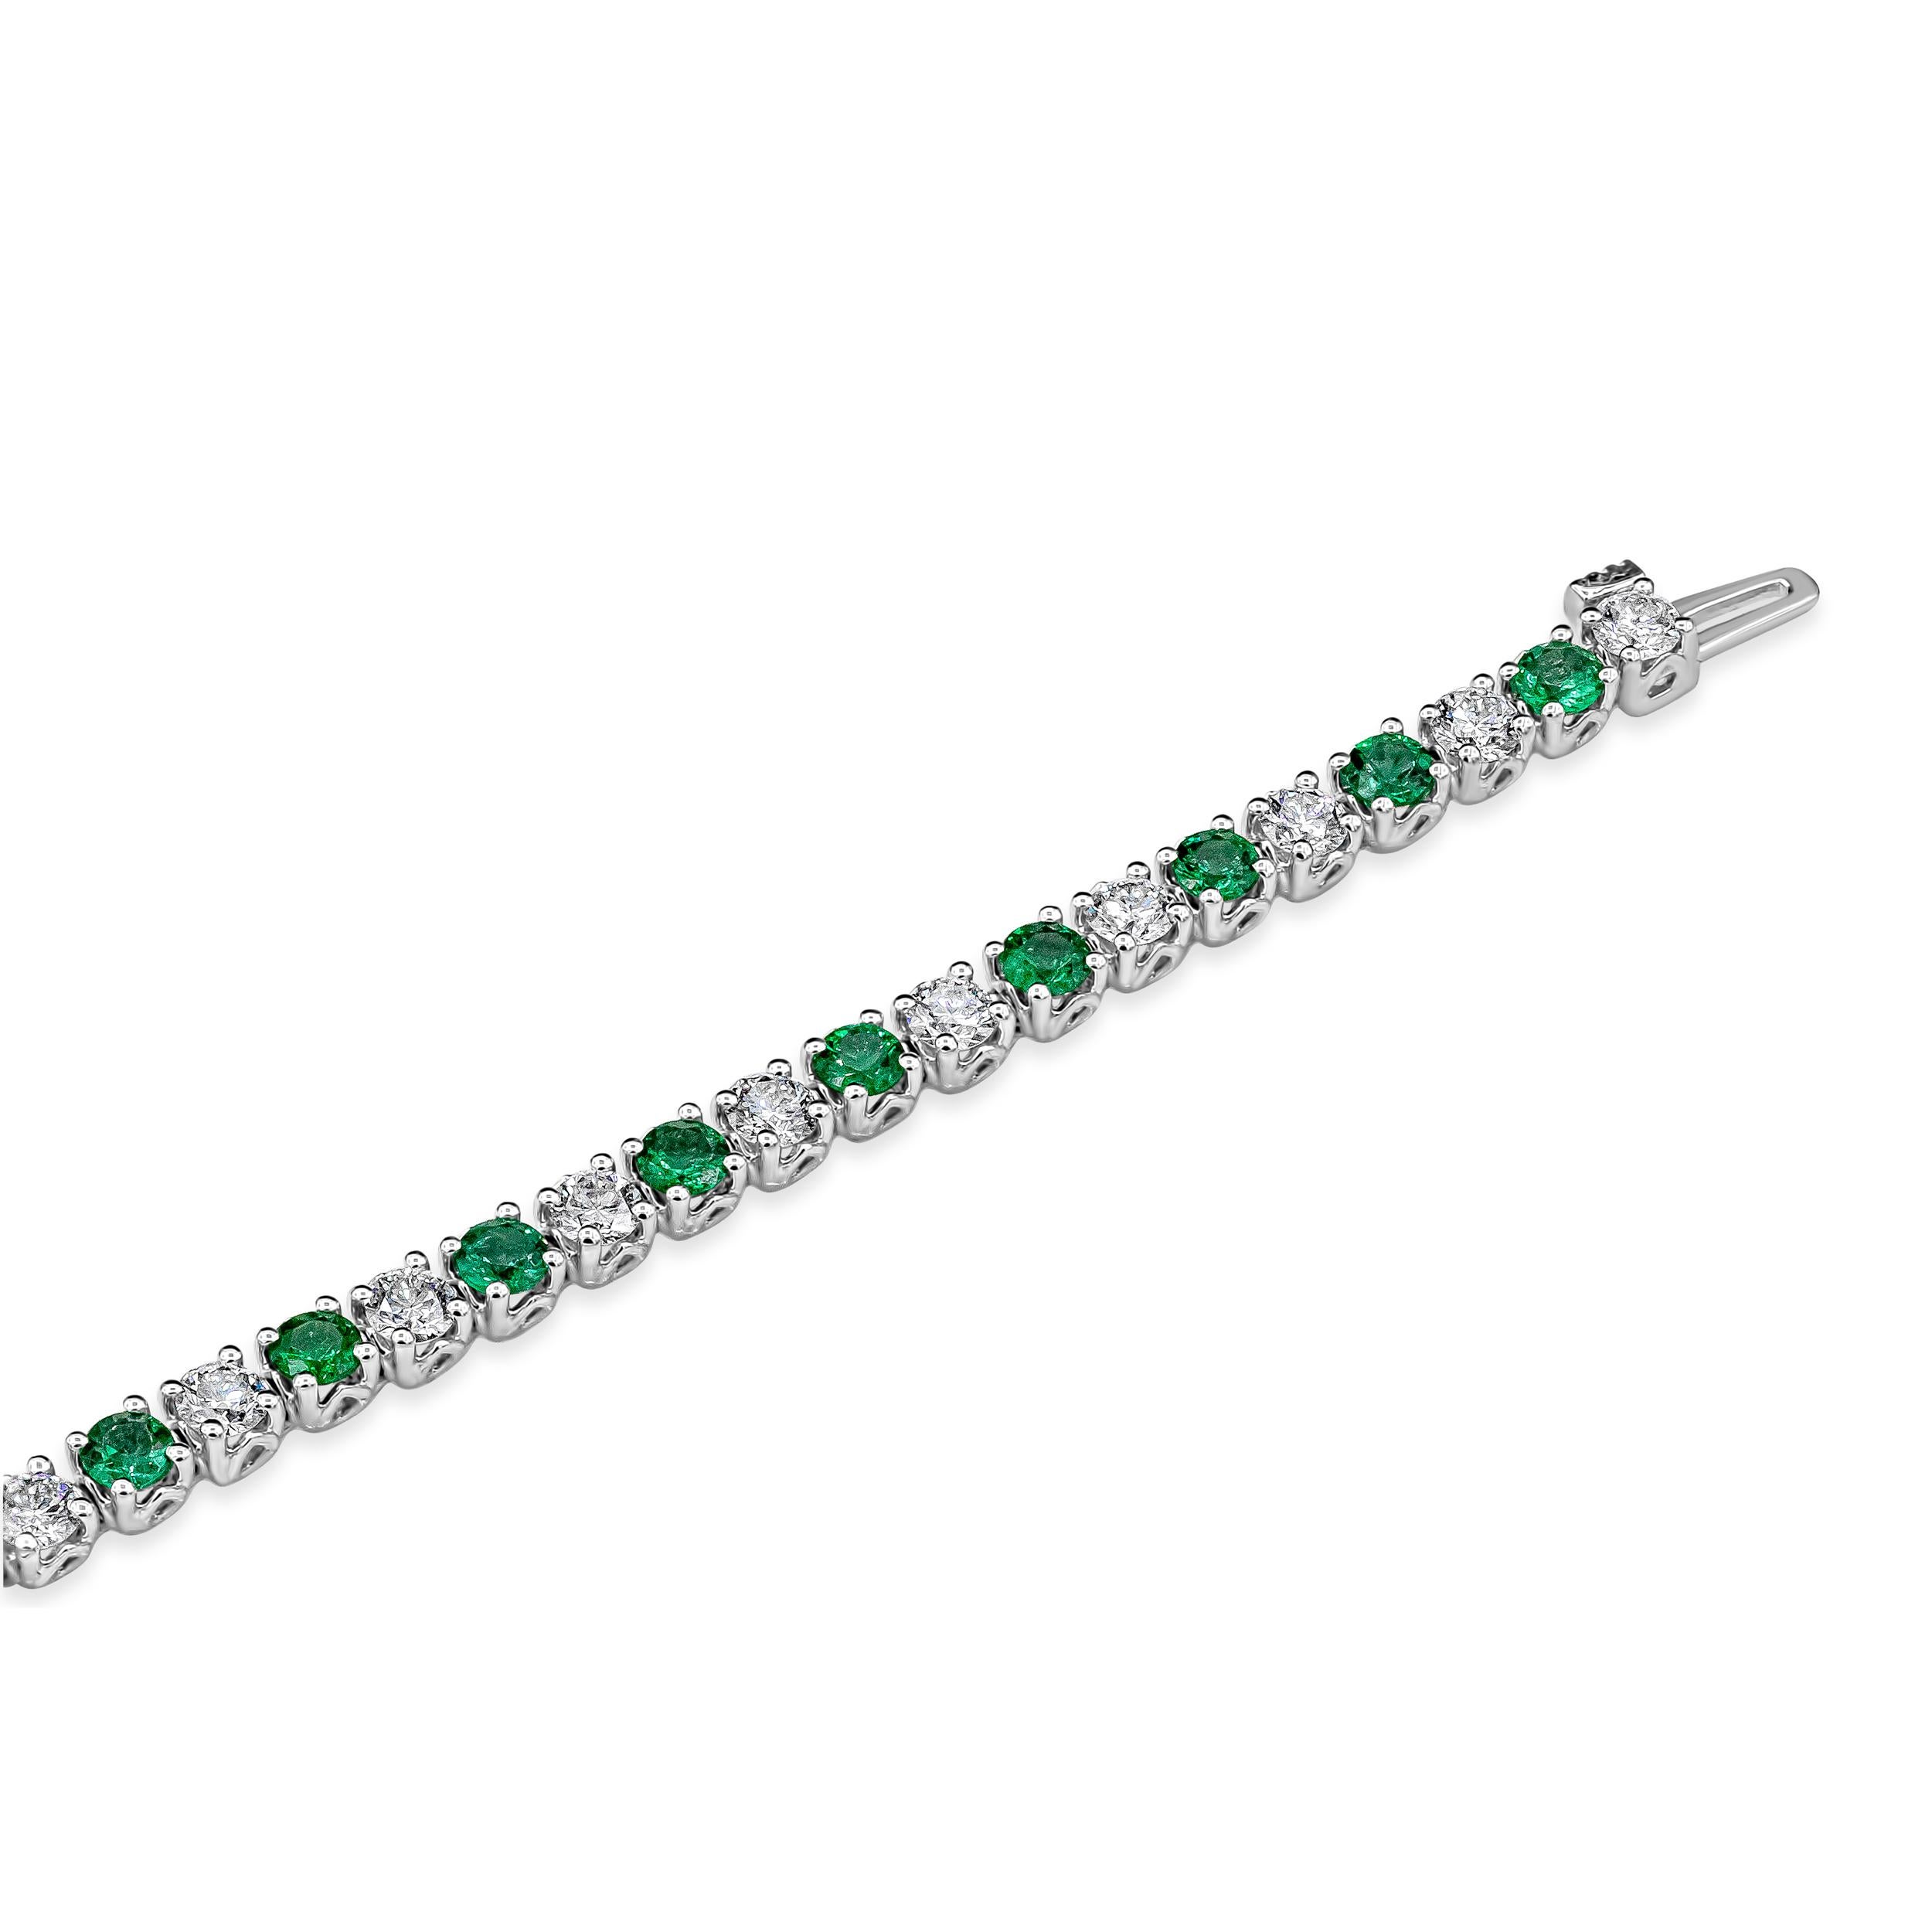 Custom Order: Approximately 4 - 5 weeks to handcraft.

Showcasing vibrant green emeralds, elegantly alternating with round brilliant diamonds. Made in 14 karat yellow gold. Diamonds and emeralds will weigh approximately 5.50 - 6.00 carats